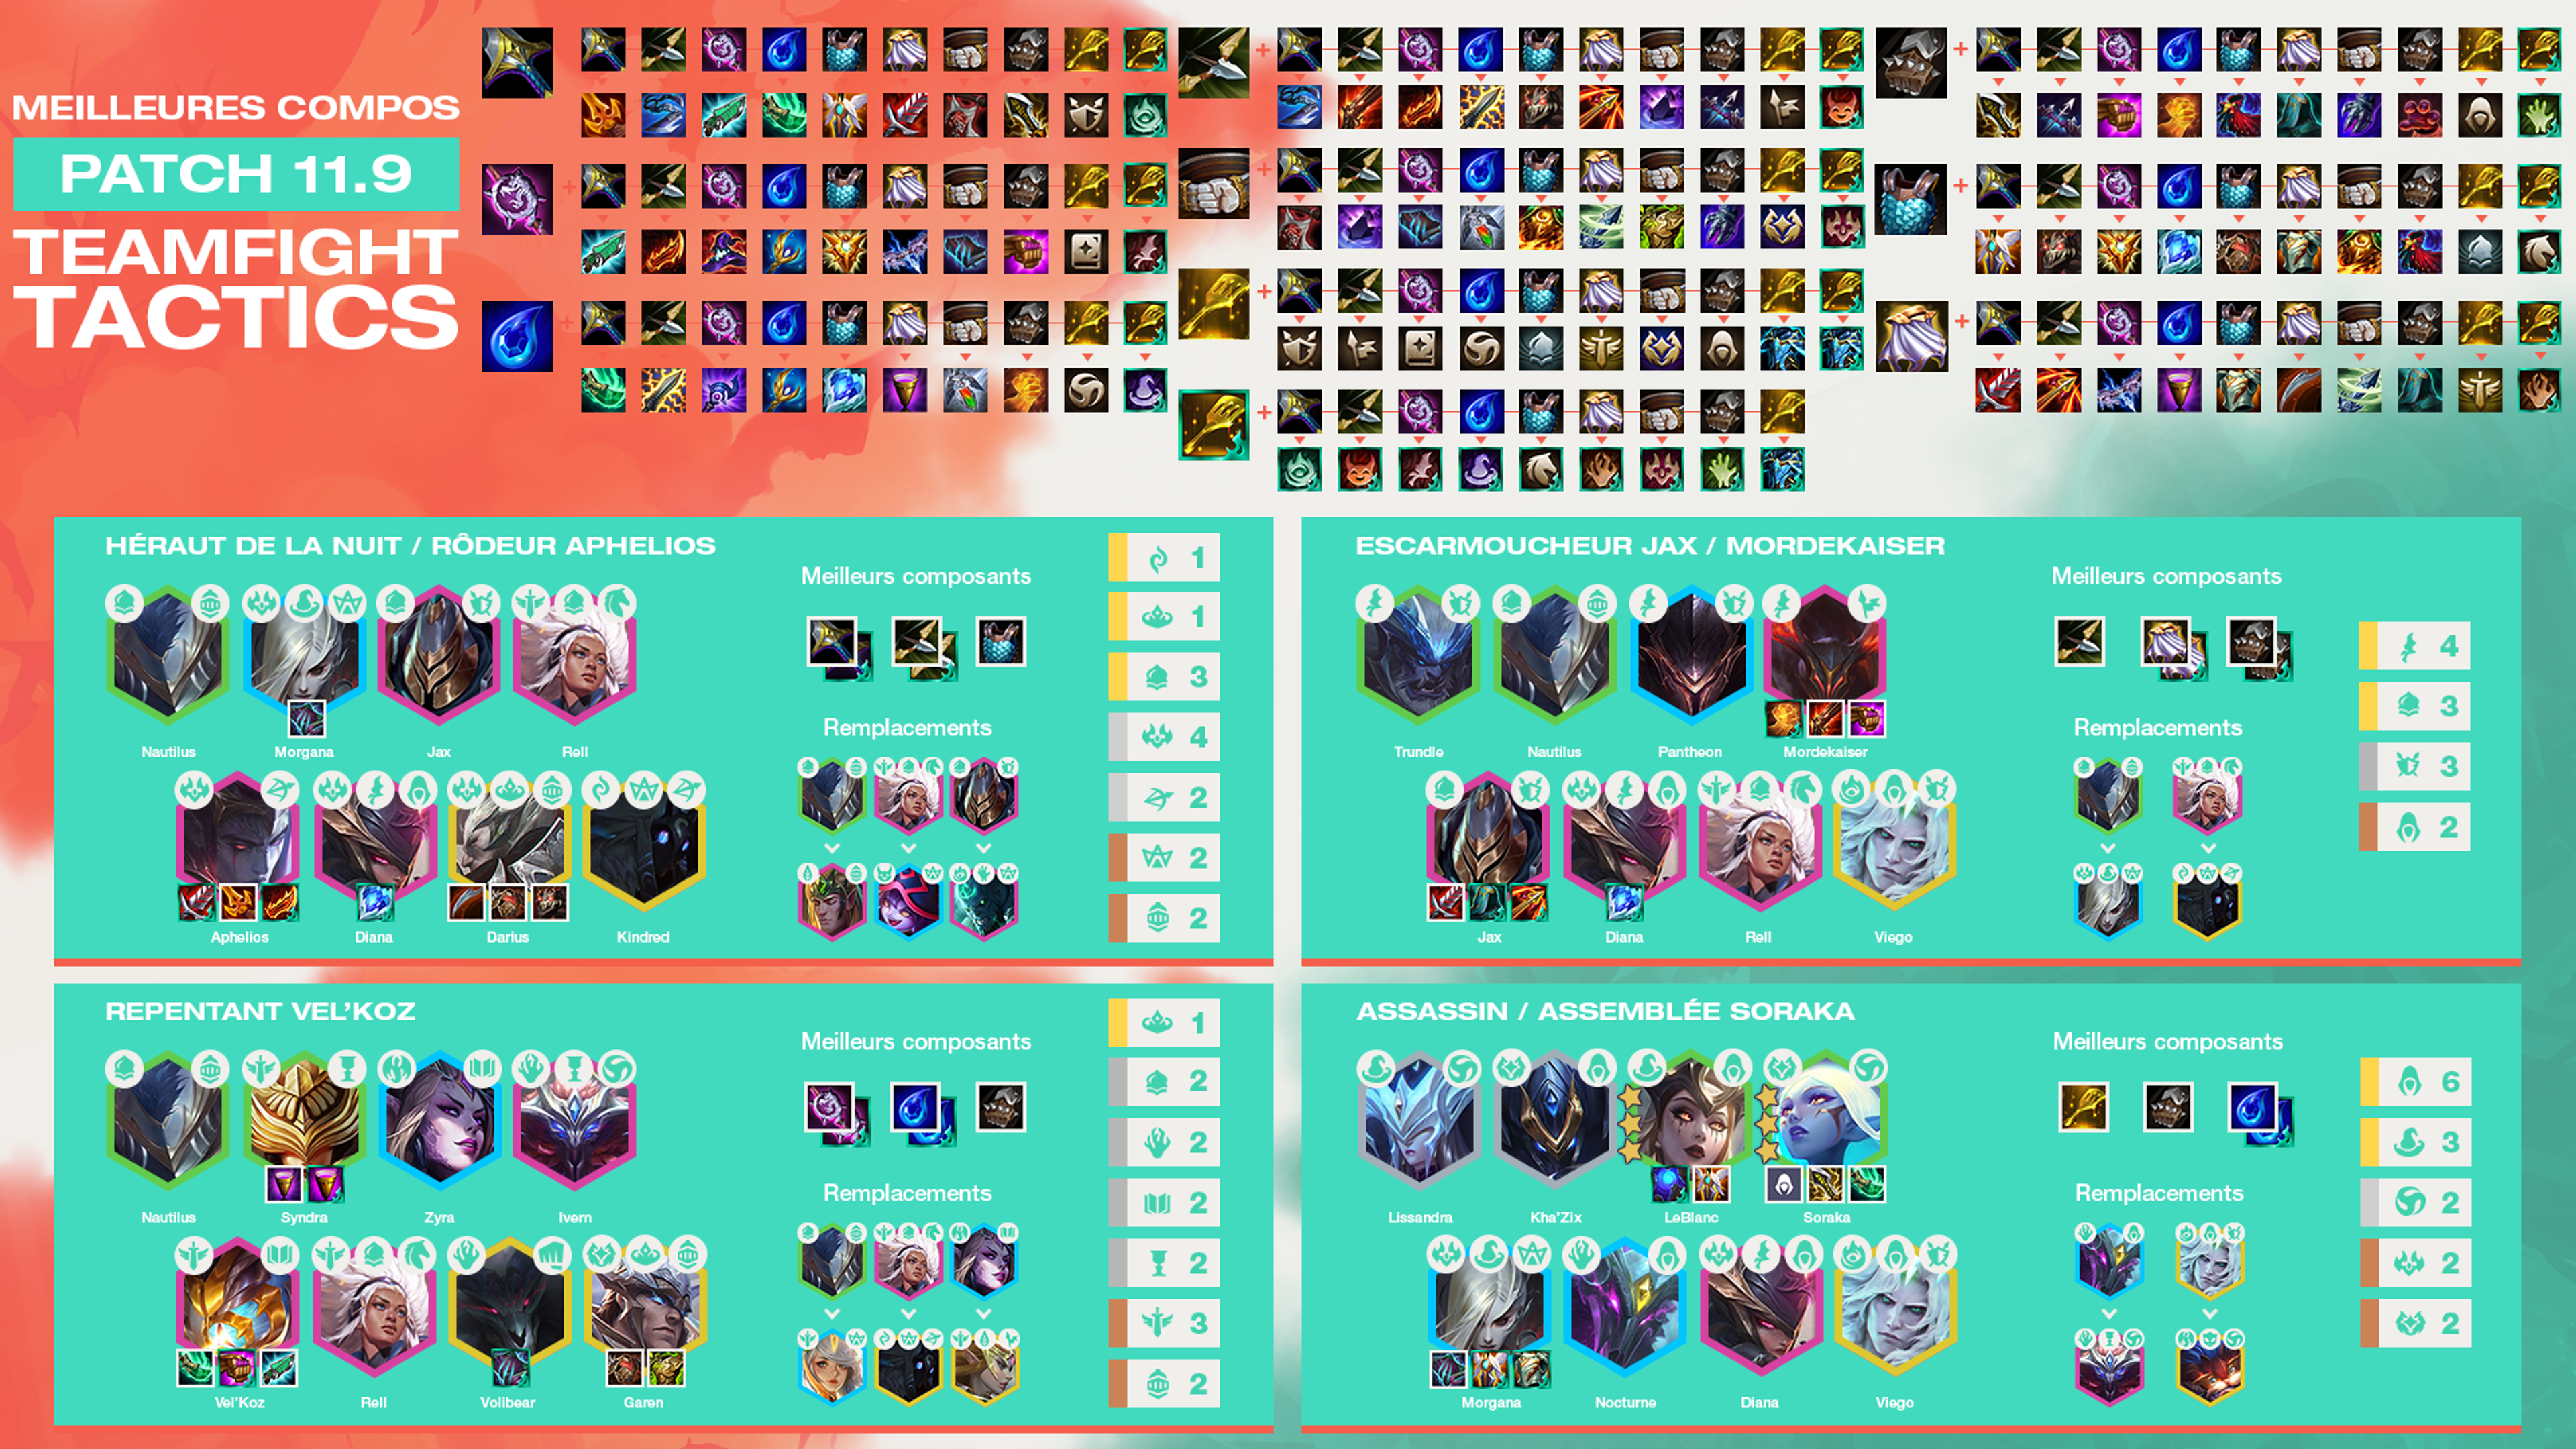 TFT-Cheat-Sheet-Compo-Patch-11.9